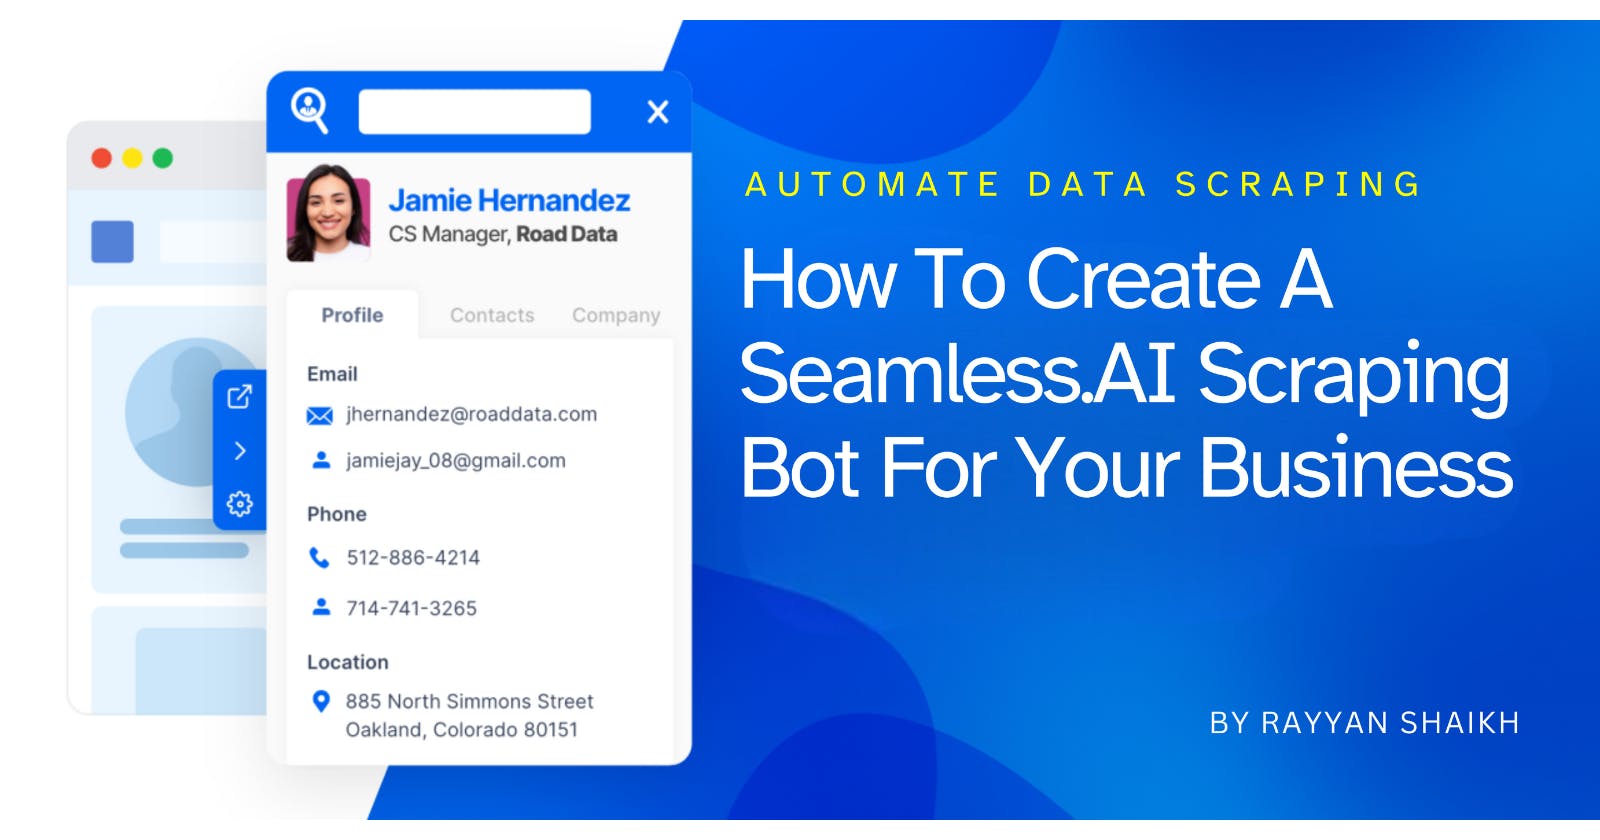 How To Create A Seamless.AI Scraping Bot For Your Business